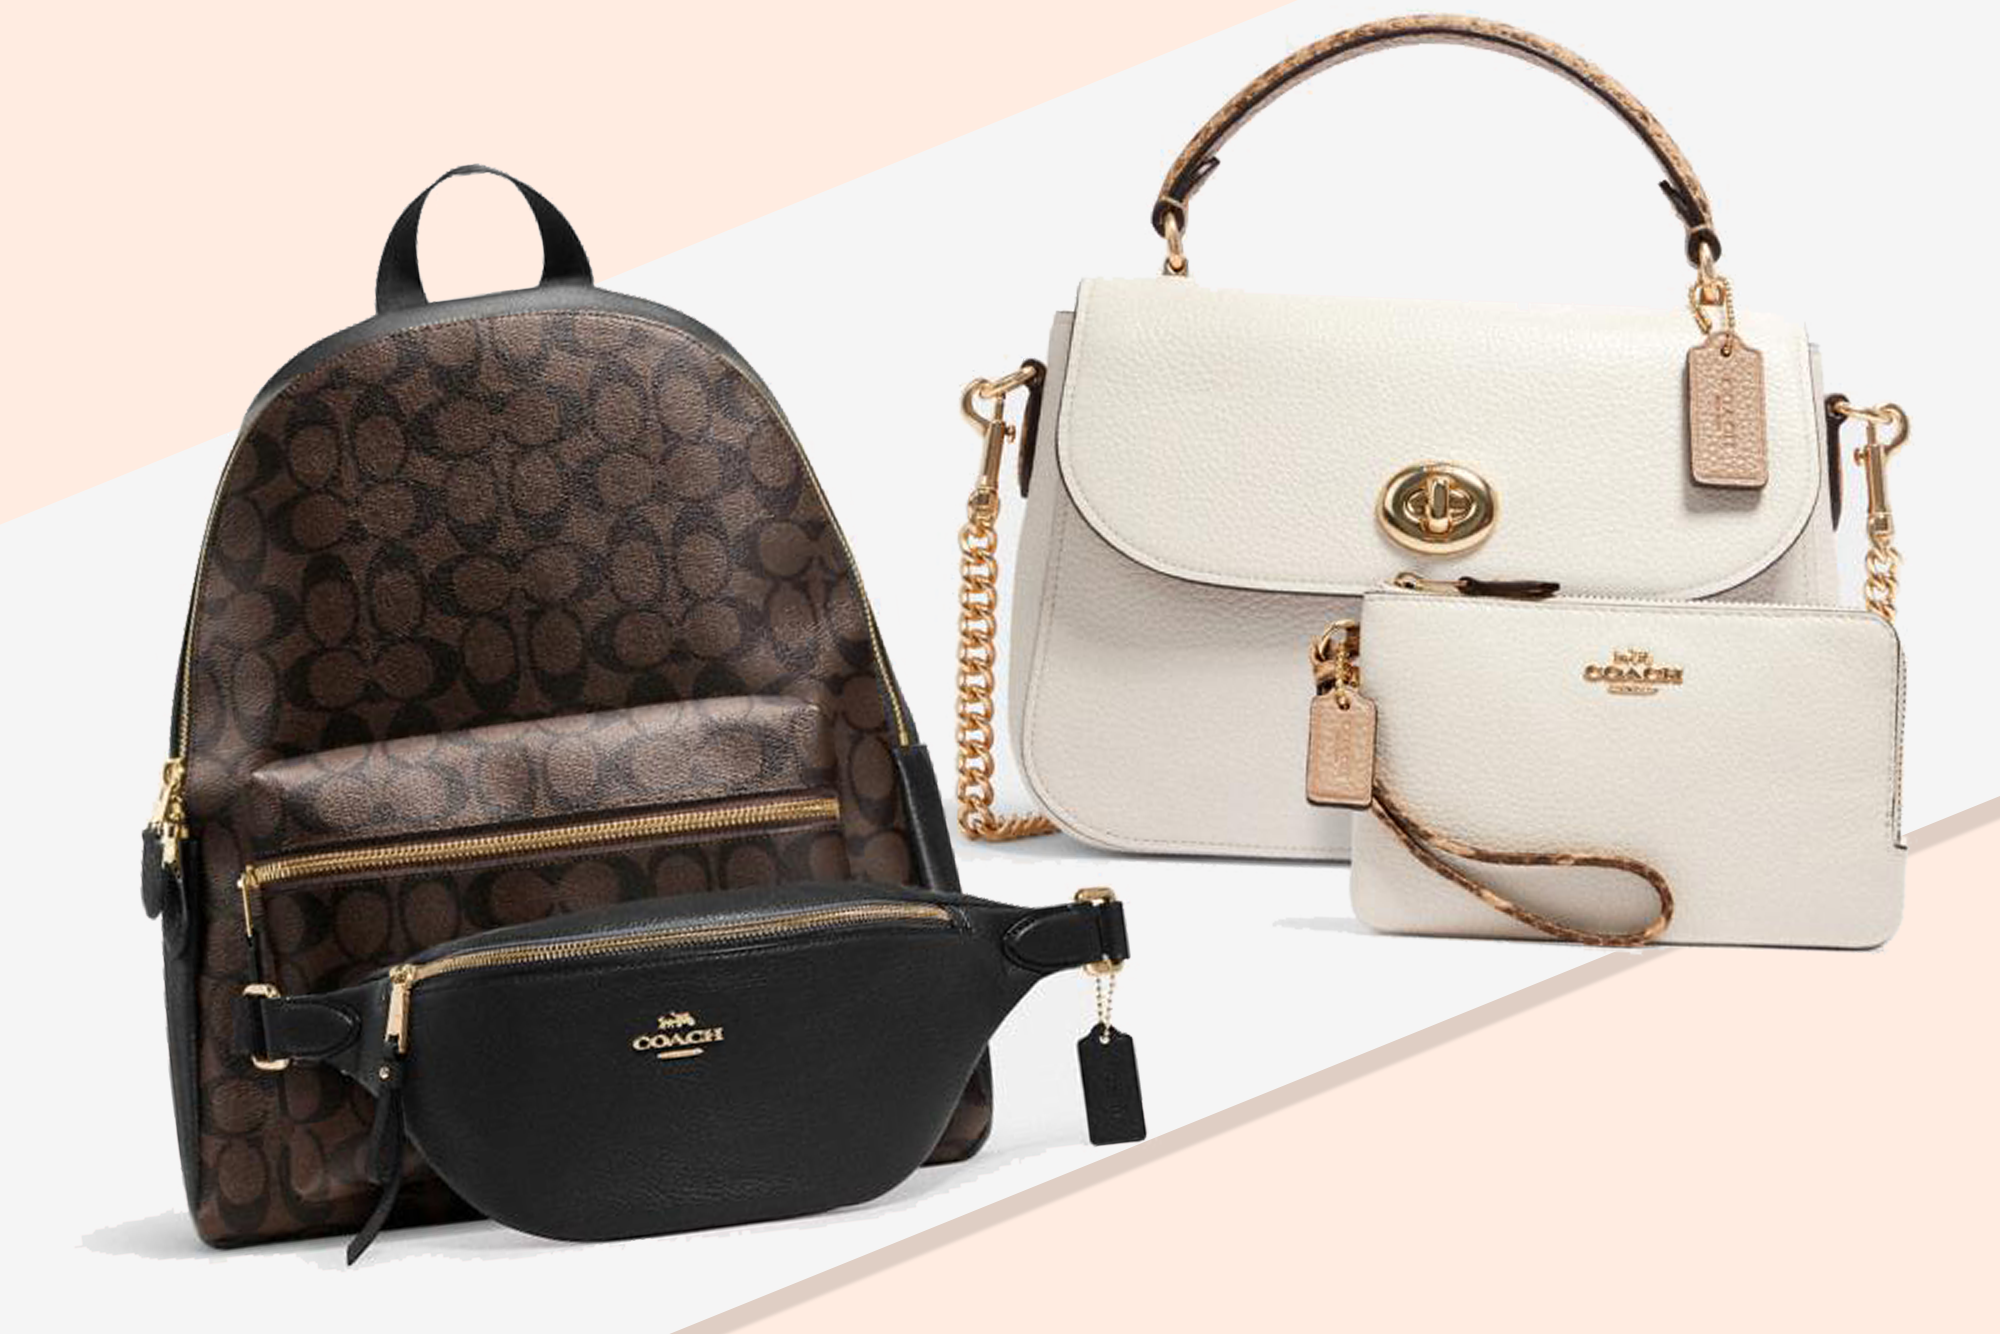 Coach Outlet Clearance Sale: 75% off on Select Styles